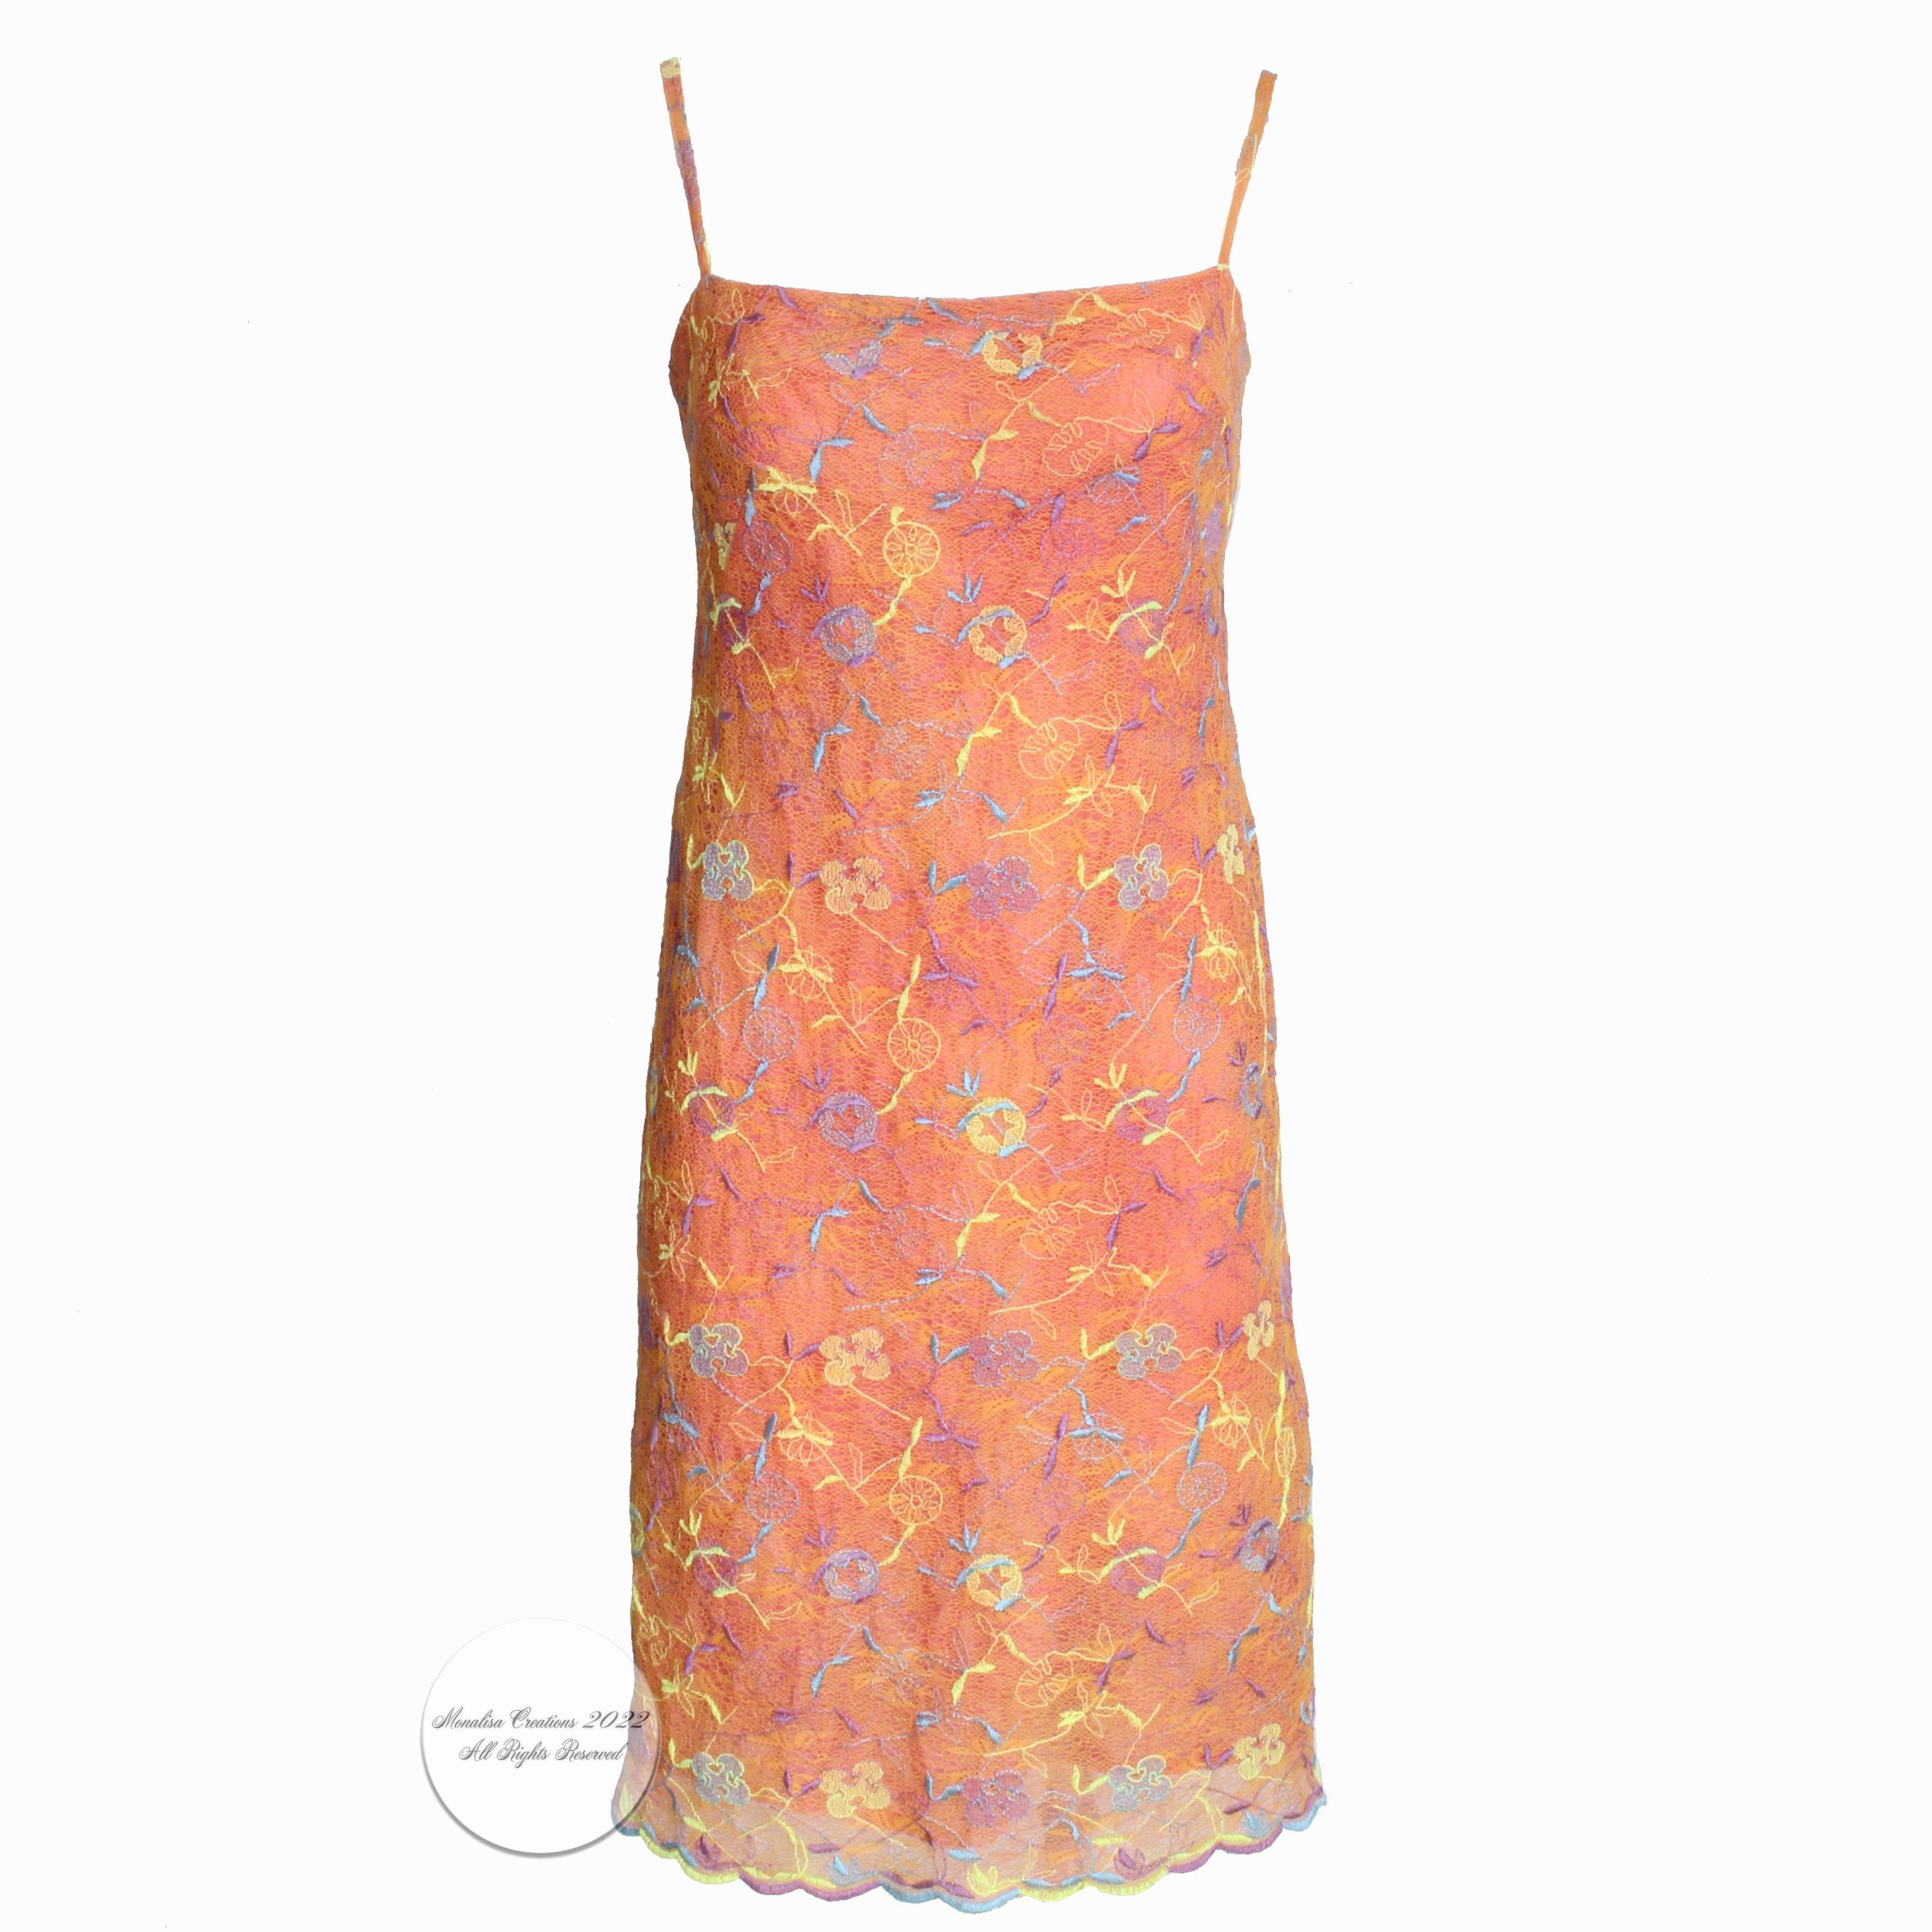 Christian Lacroix Bazar colorful embroidered sundress, likely made in the 90s.  Made from a polyester blend fabric, it's cut sheath style with spaghetti straps and has an embroidered scalloped hem.  Perfect for your holiday jaunts and so easy to